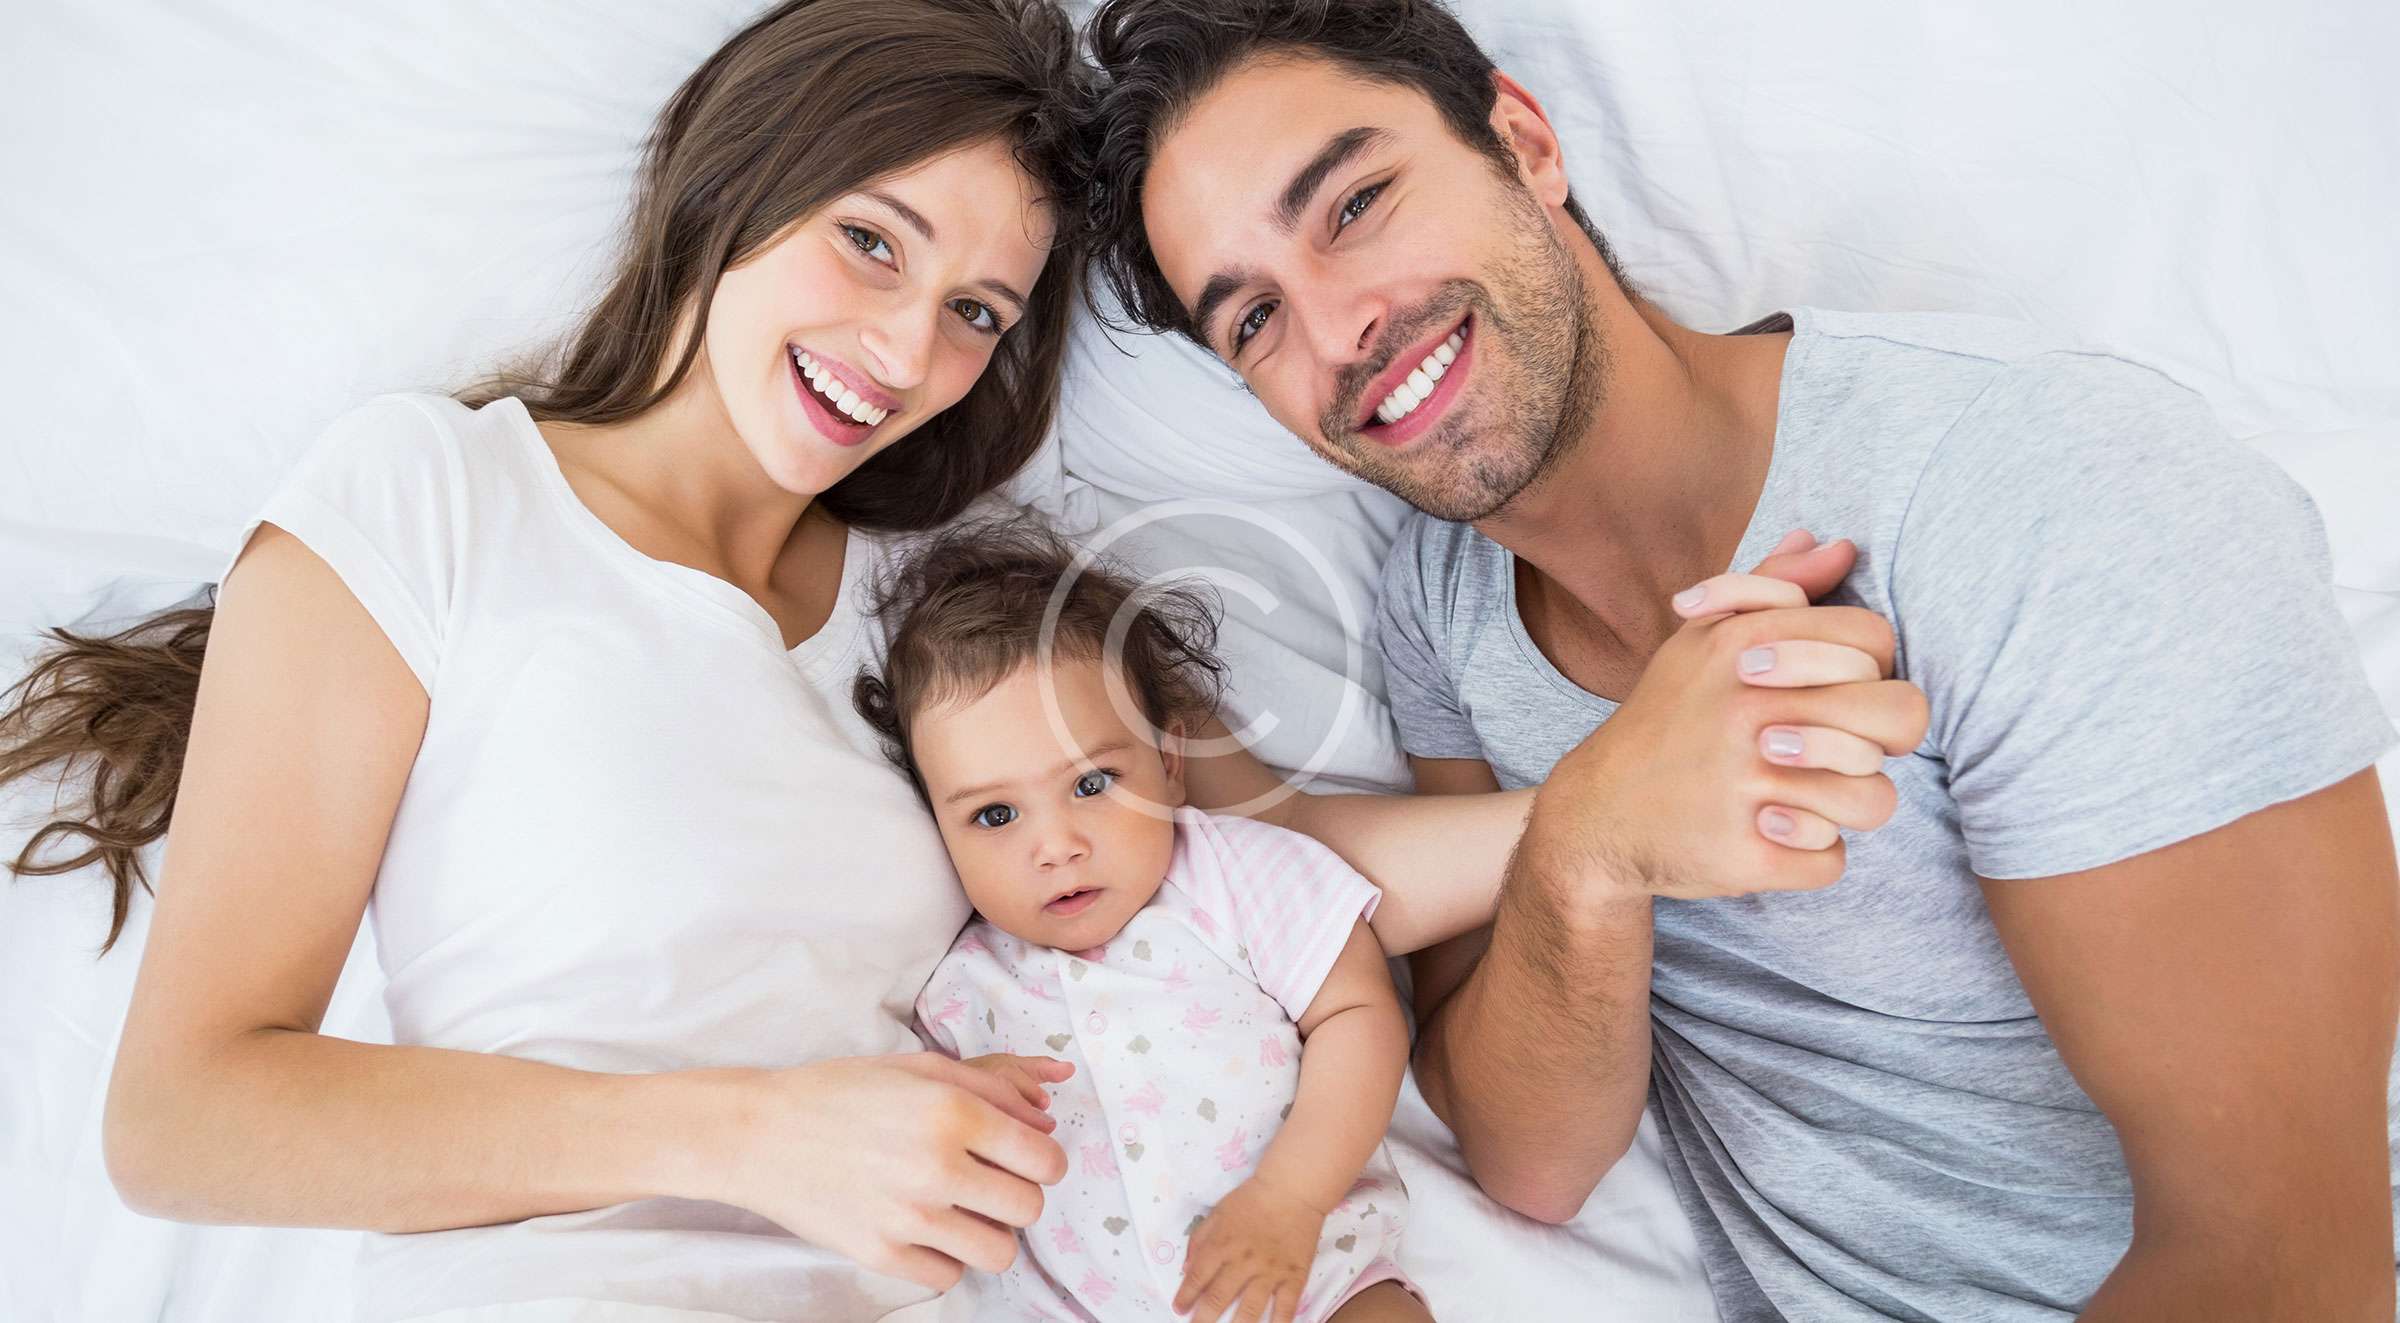 8 Ways for Men to Supercharge Their Fertility